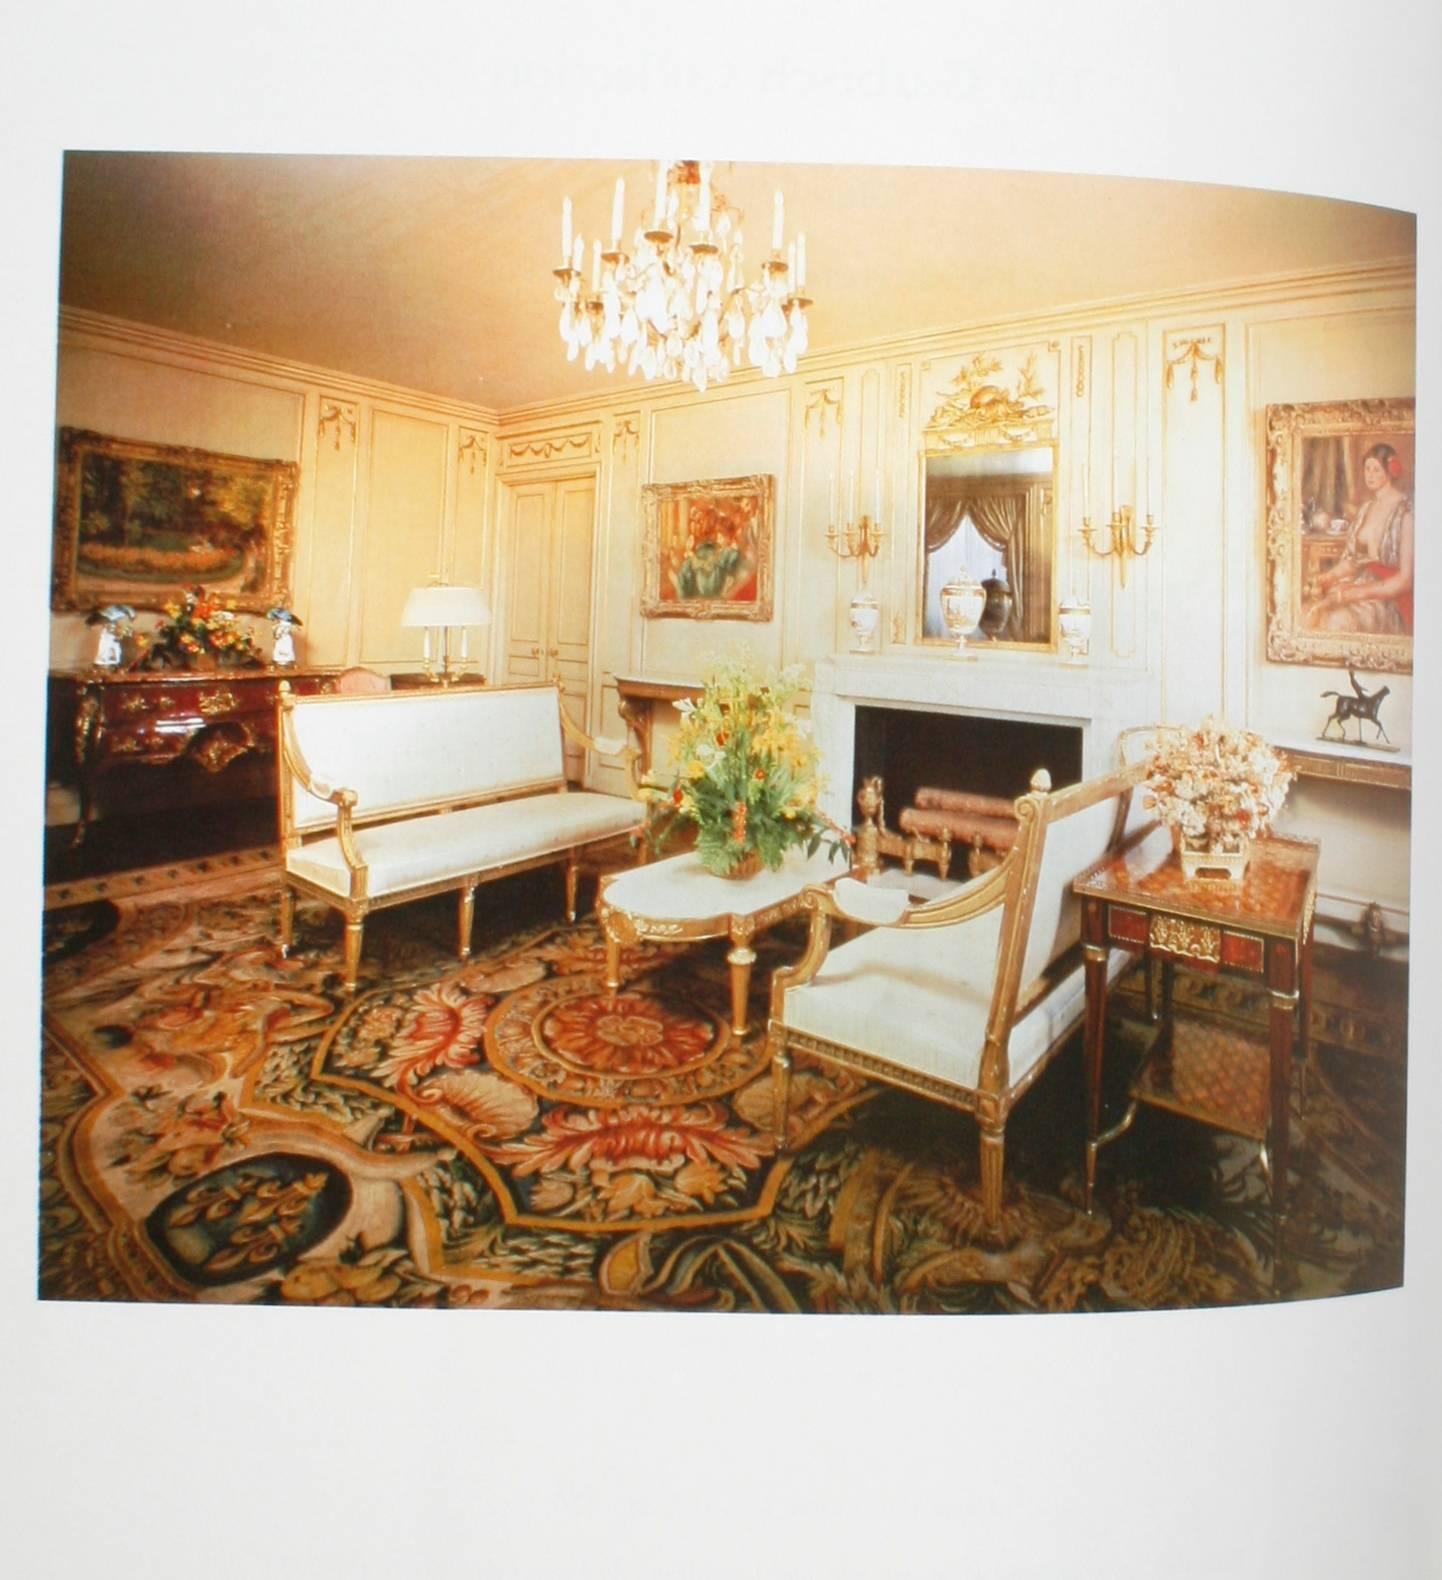 Sotheby's: The Garbisch Collection, Vol. 2, May 17, 1980, important French furniture, European porcelain Vertu, and rugs. First edition hardcover with dust jacket. 588 lots of important Chinese export porcelain, European ceramics, and silver.